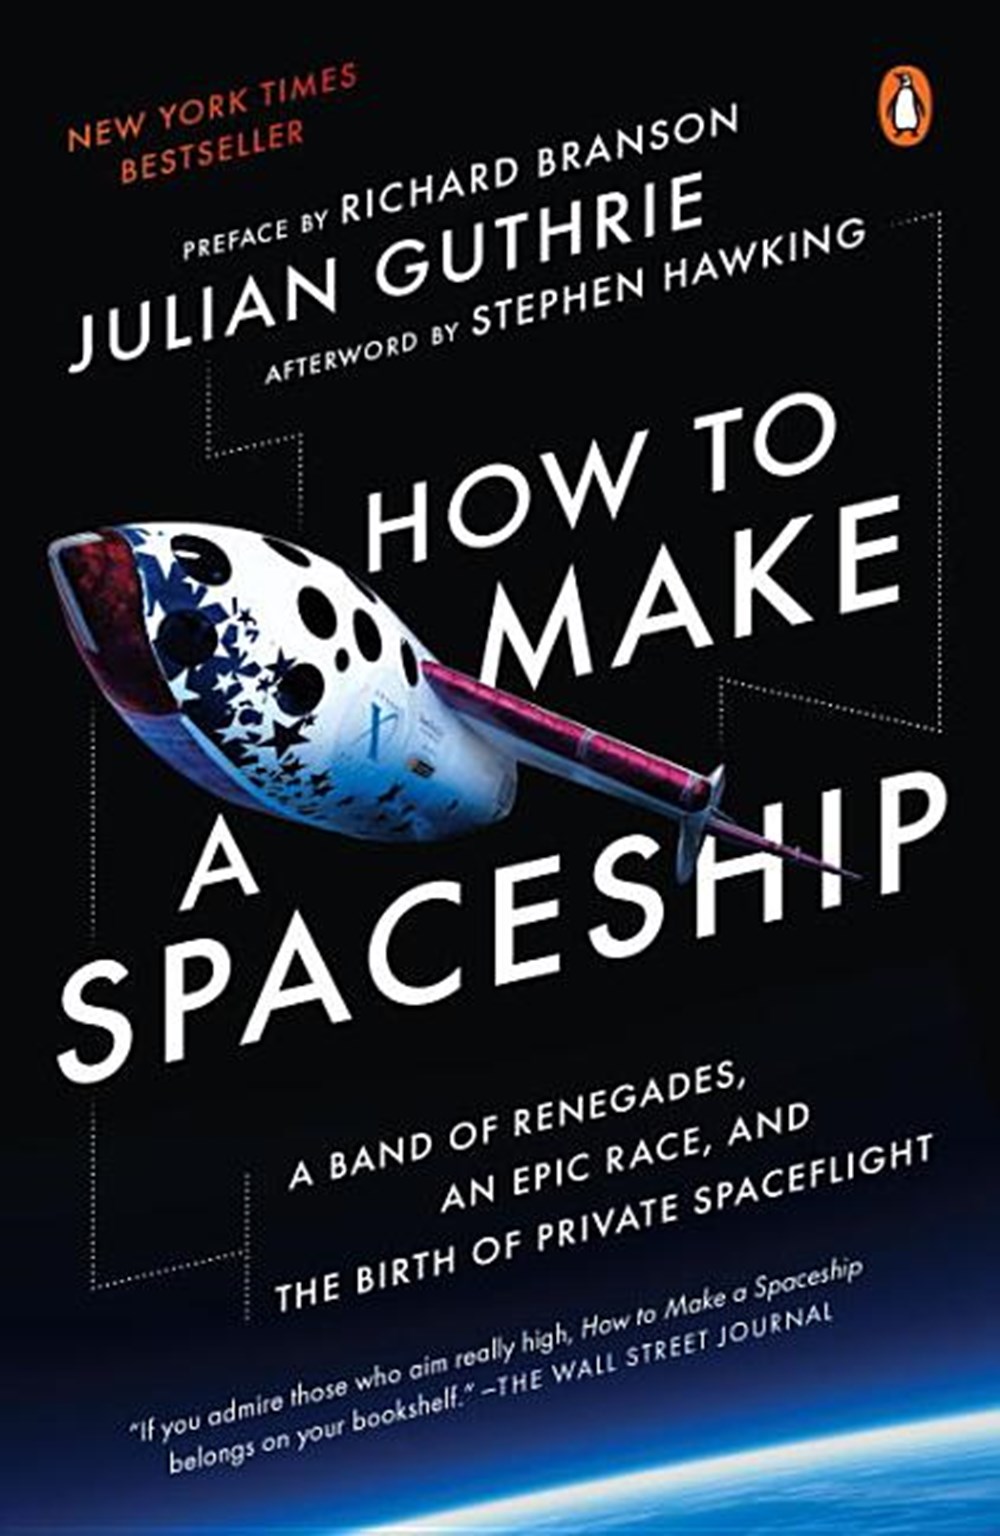 How to Make a Spaceship A Band of Renegades, an Epic Race, and the Birth of Private Spaceflight